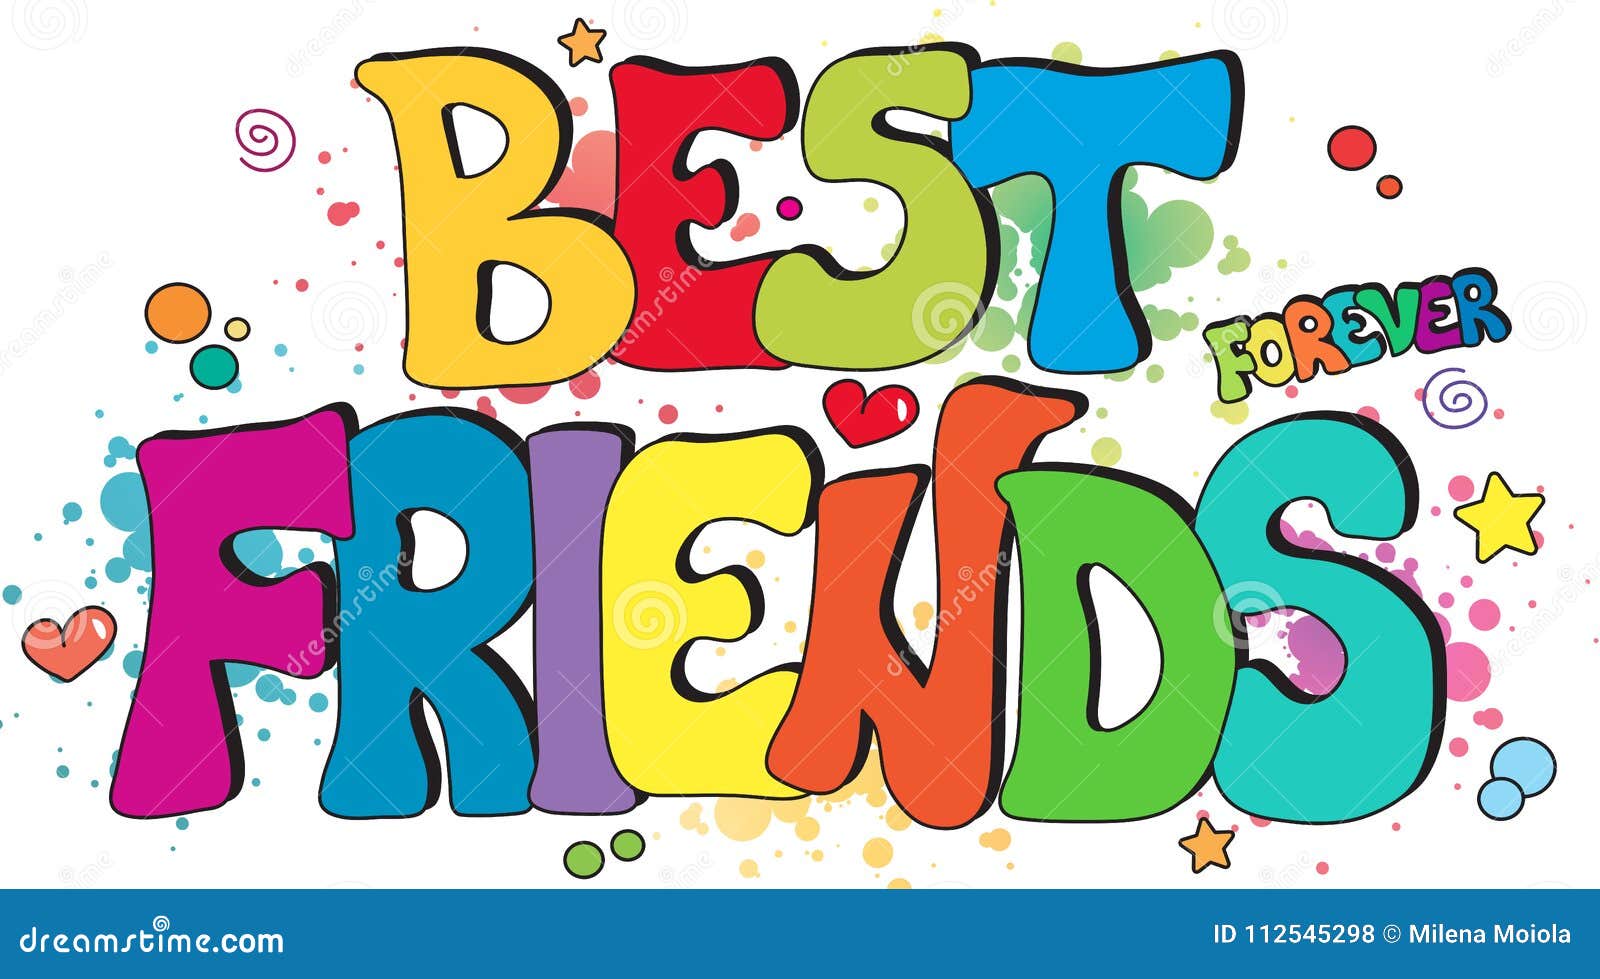 Friends Forever Stock Illustrations 3 401 Friends Forever Stock Illustrations Vectors Clipart Dreamstime